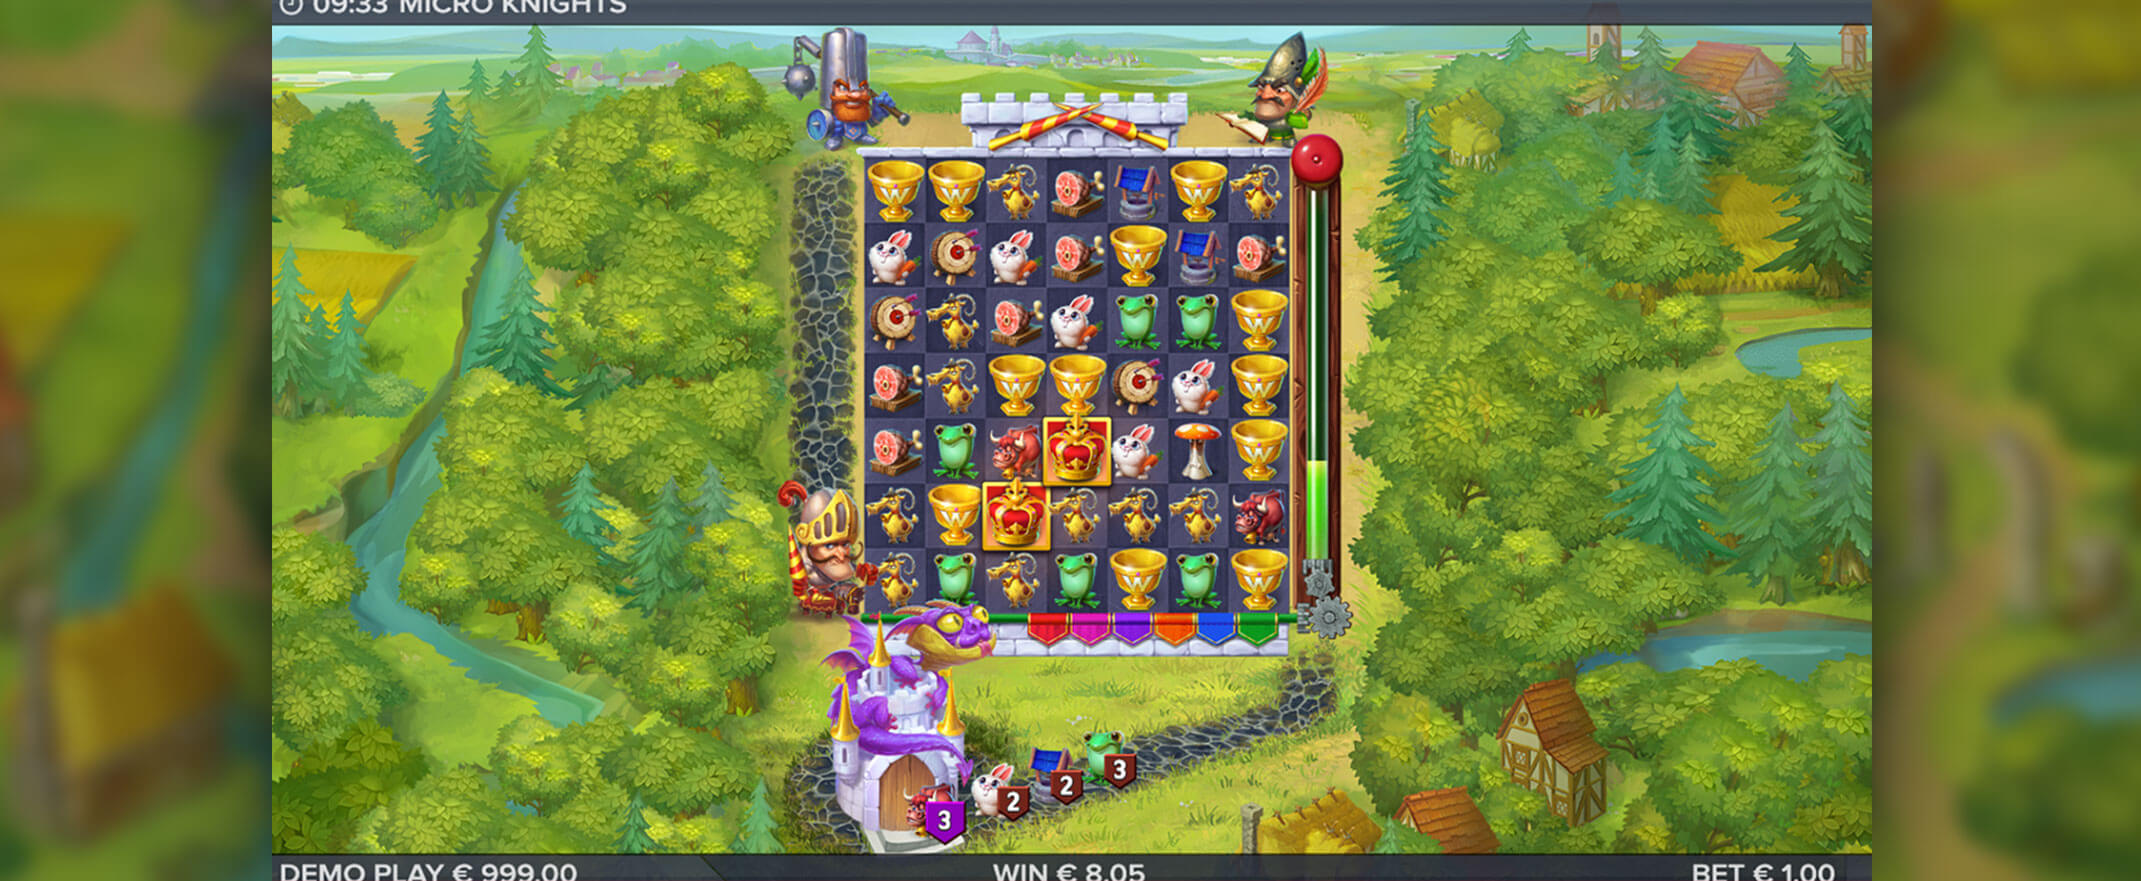 Micro Knights slot review - image of the reels and symbols